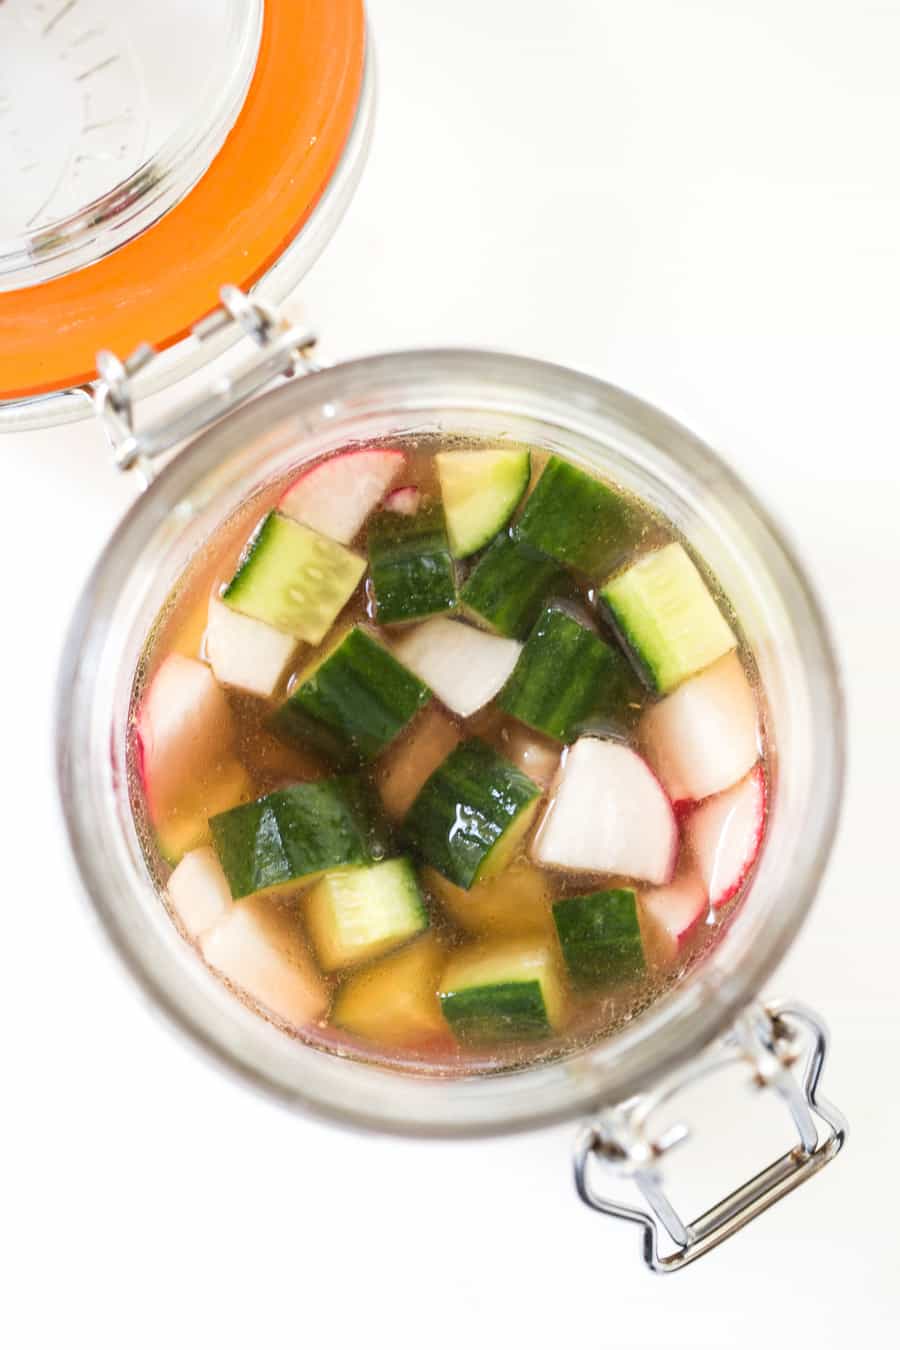 Quick Pickled Veggies with cucumbers, radishes and rice vinegar!